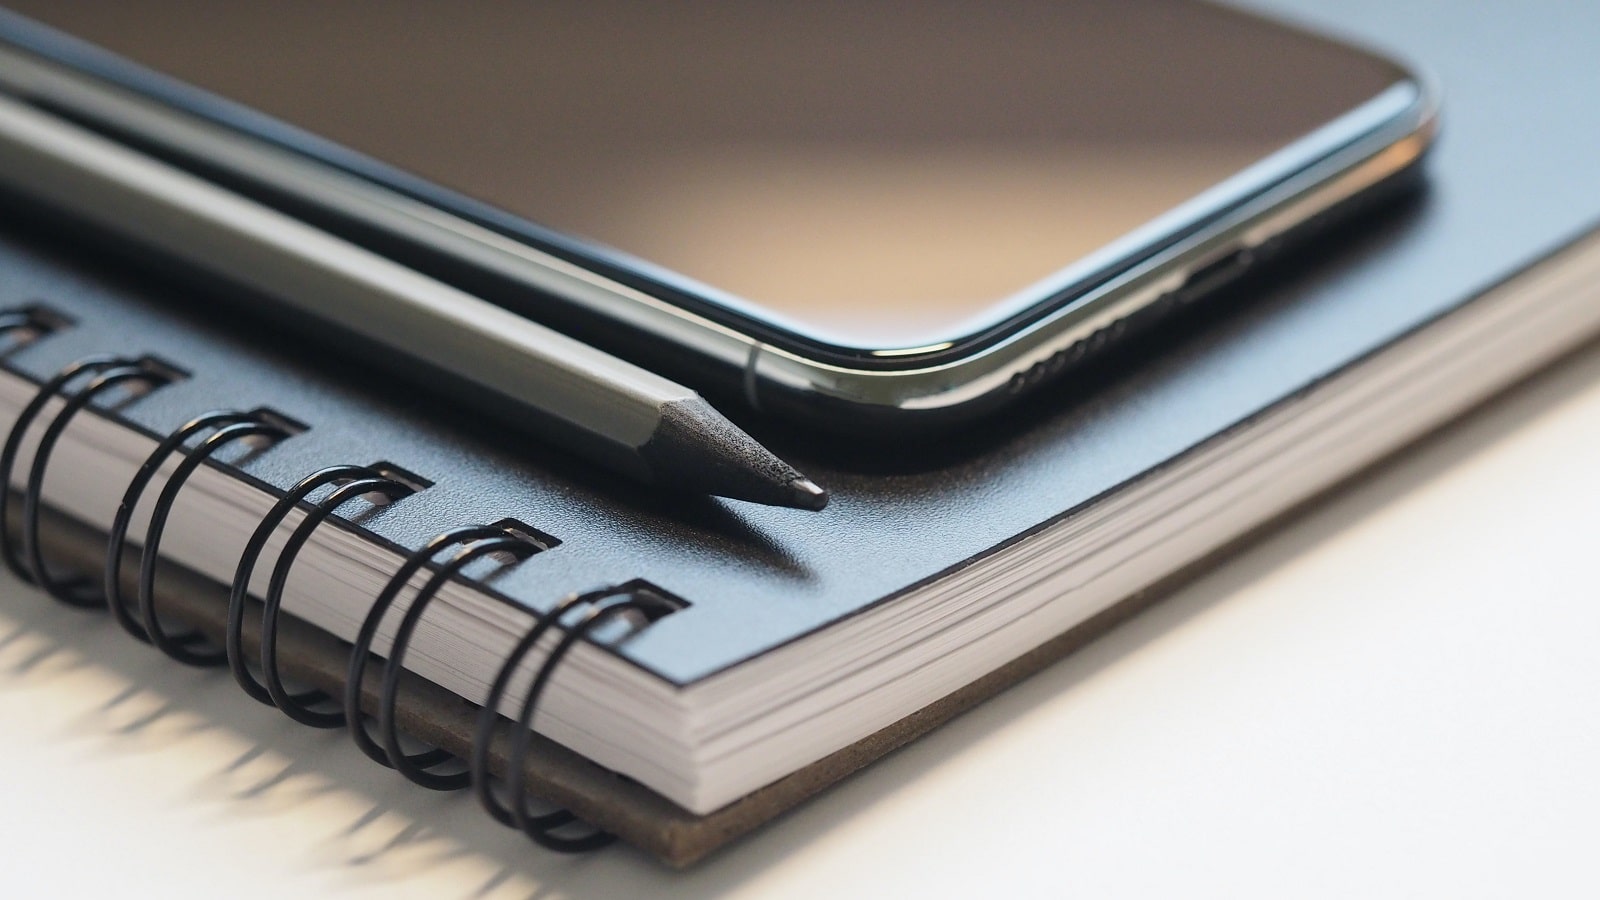 Phone on top of blue notebook with black pencil